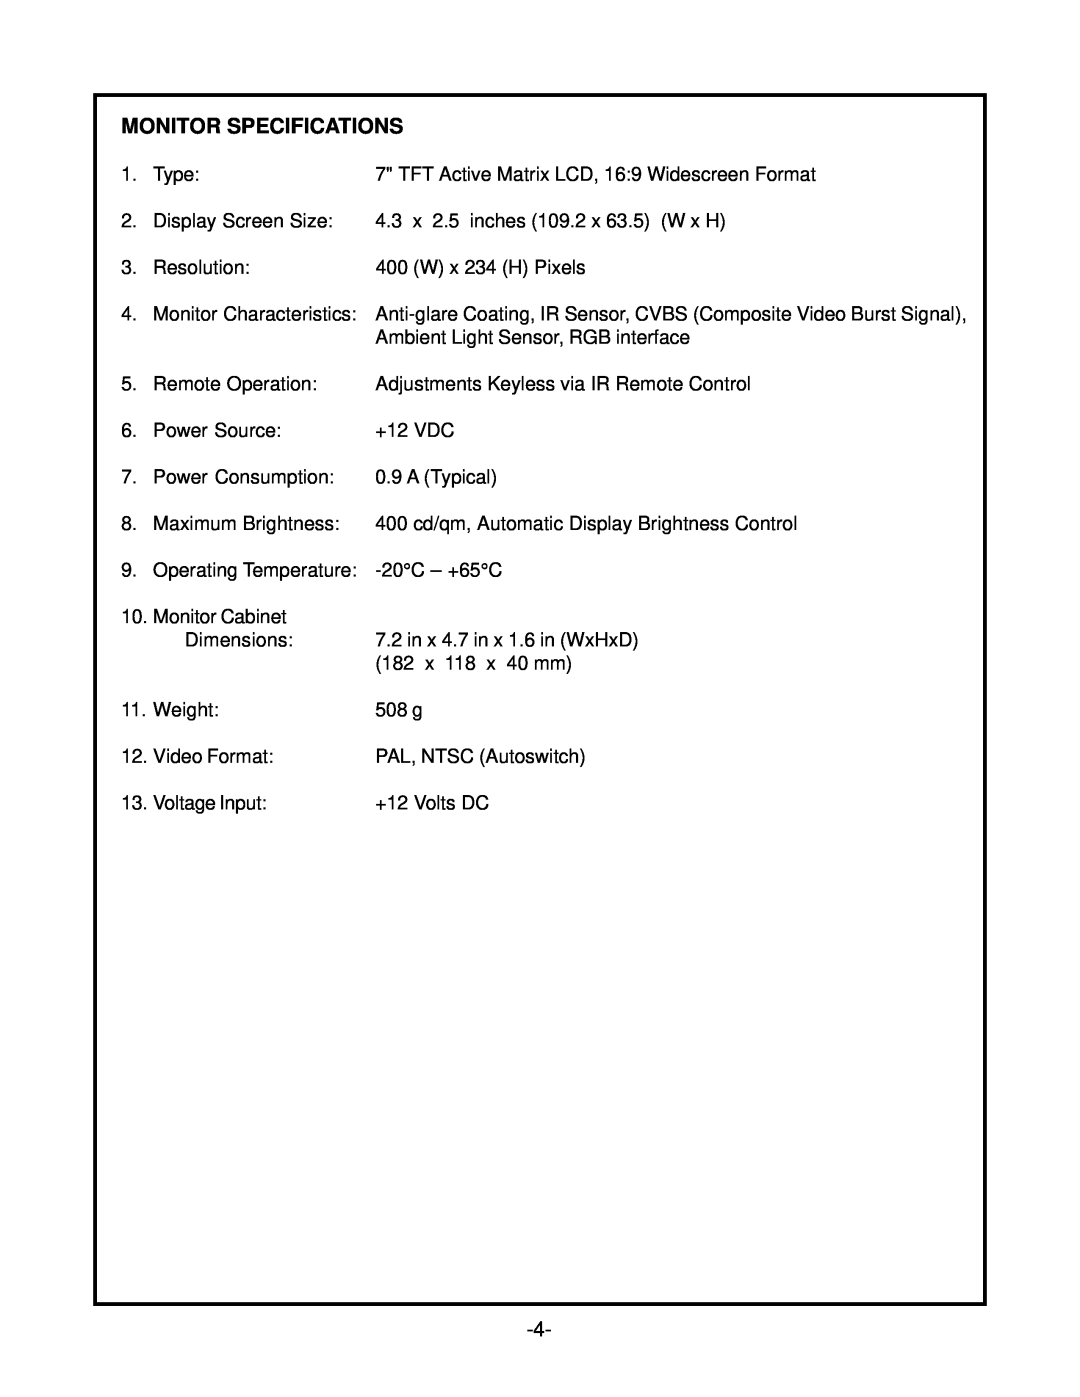 Audiovox LCM7N 7 operation manual Monitor Specifications 